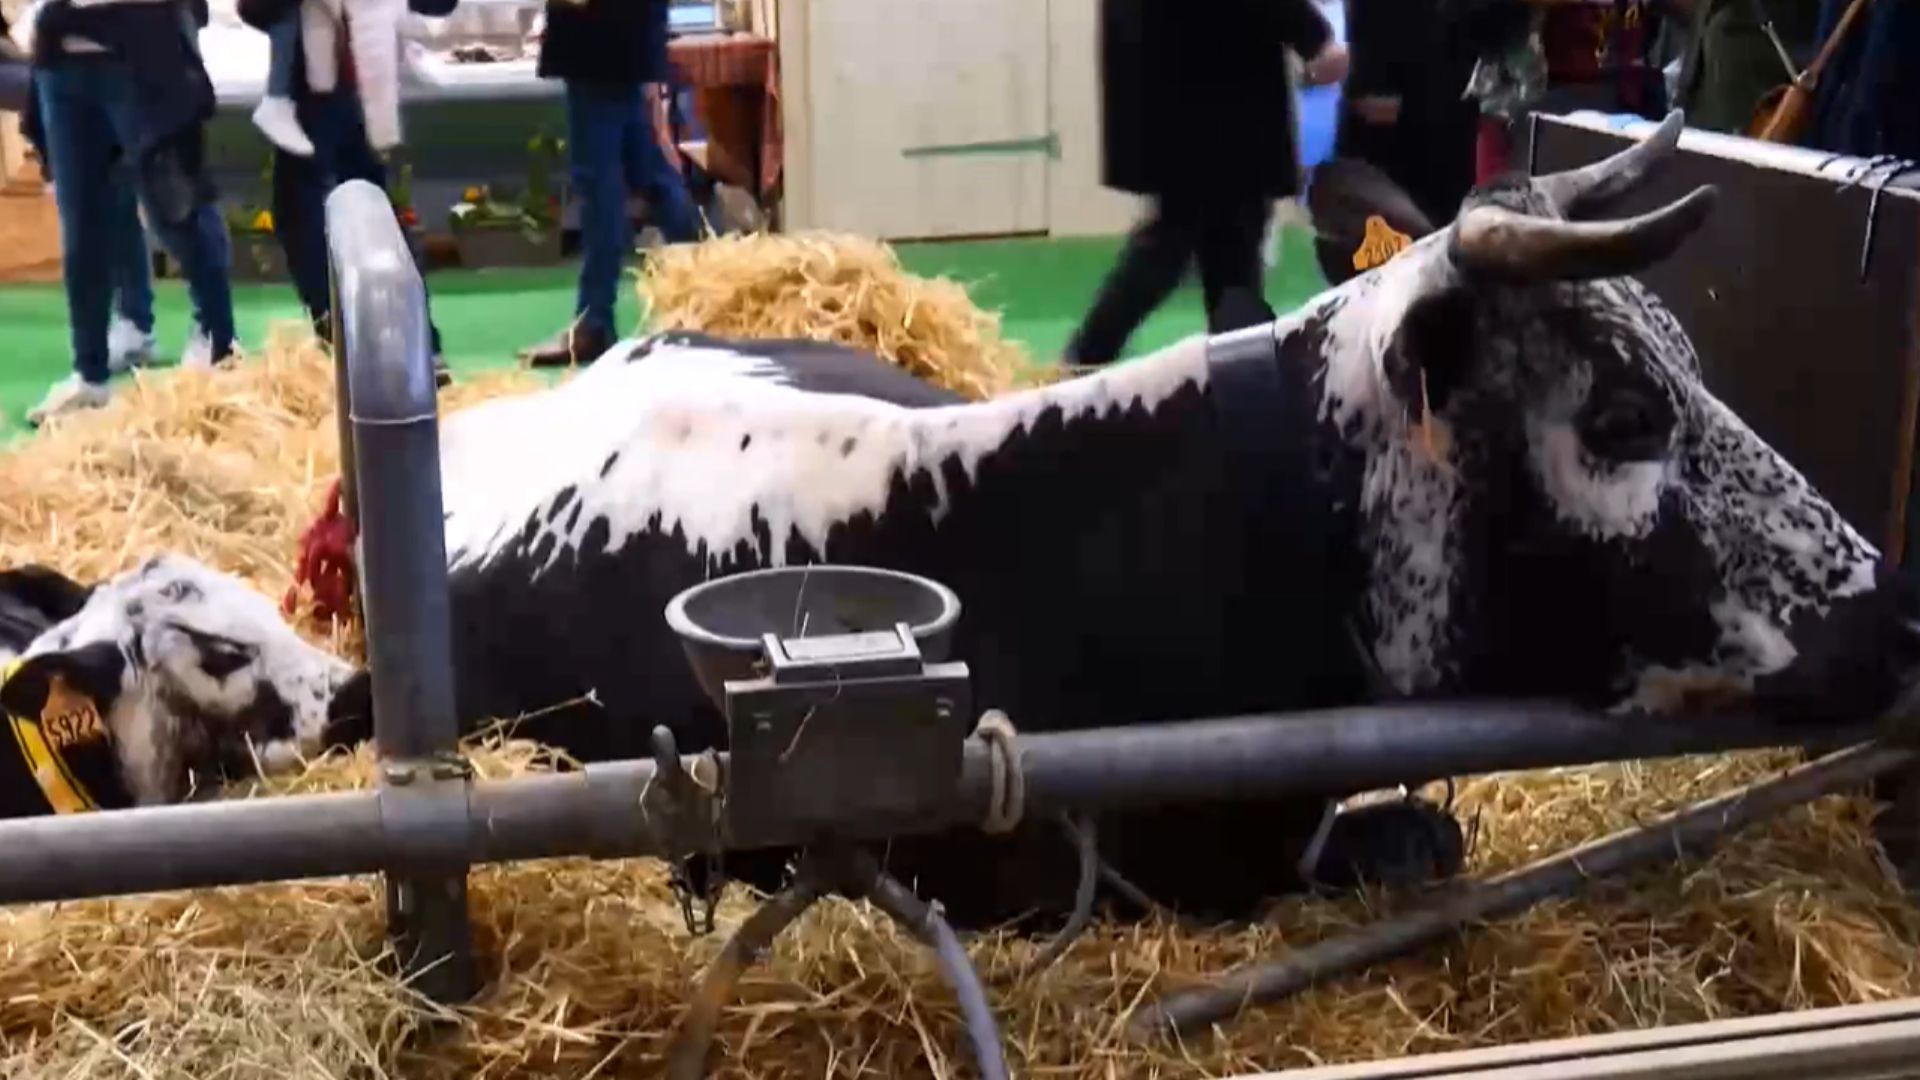 A cow and its calf at the Paris Agricultural Show. /CGTN